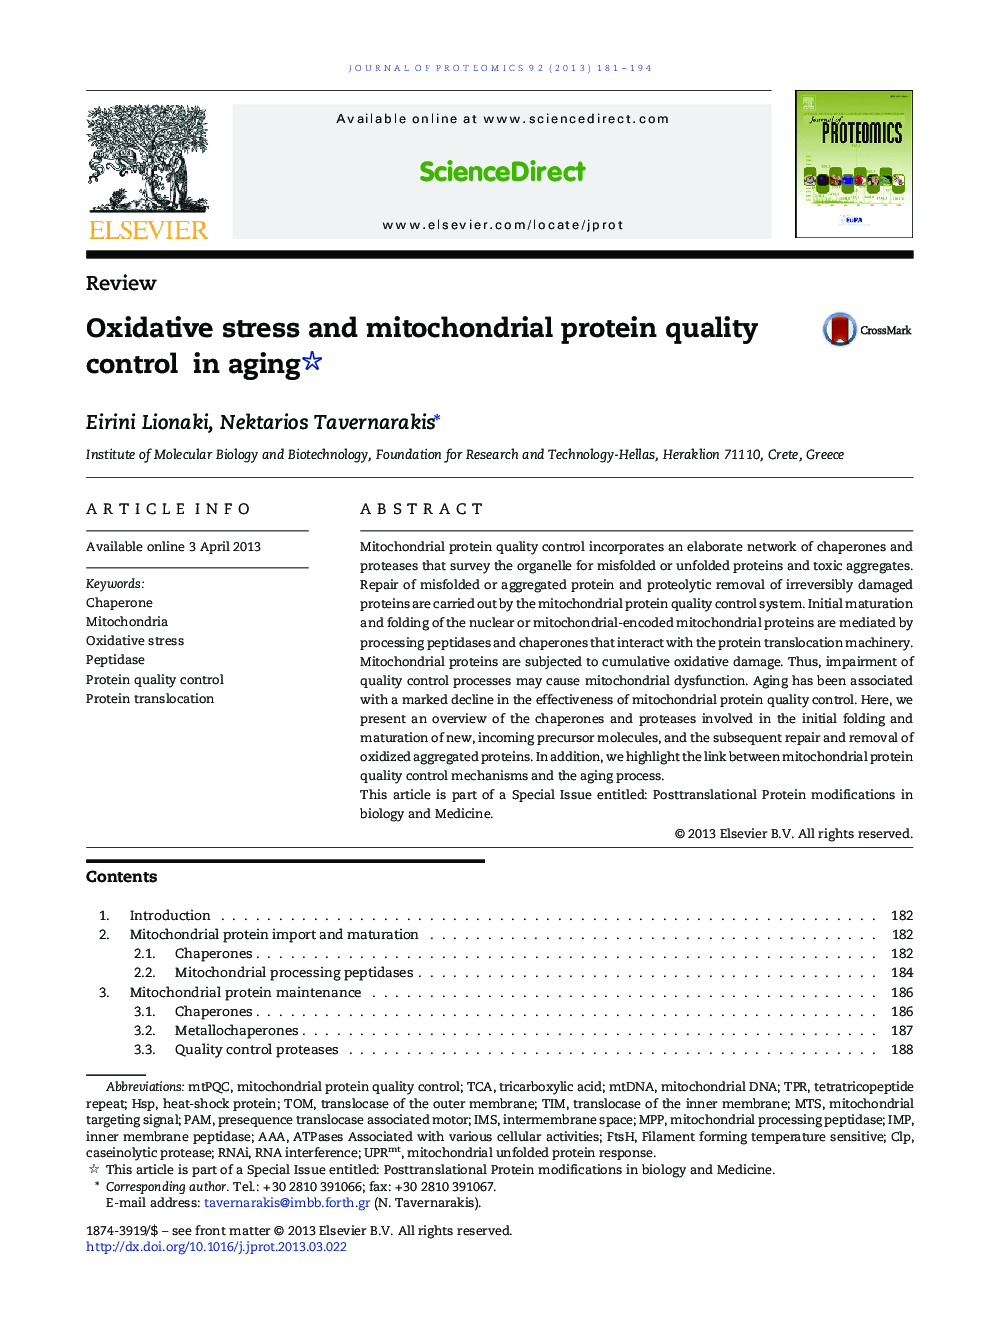 Oxidative stress and mitochondrial protein quality control in aging 